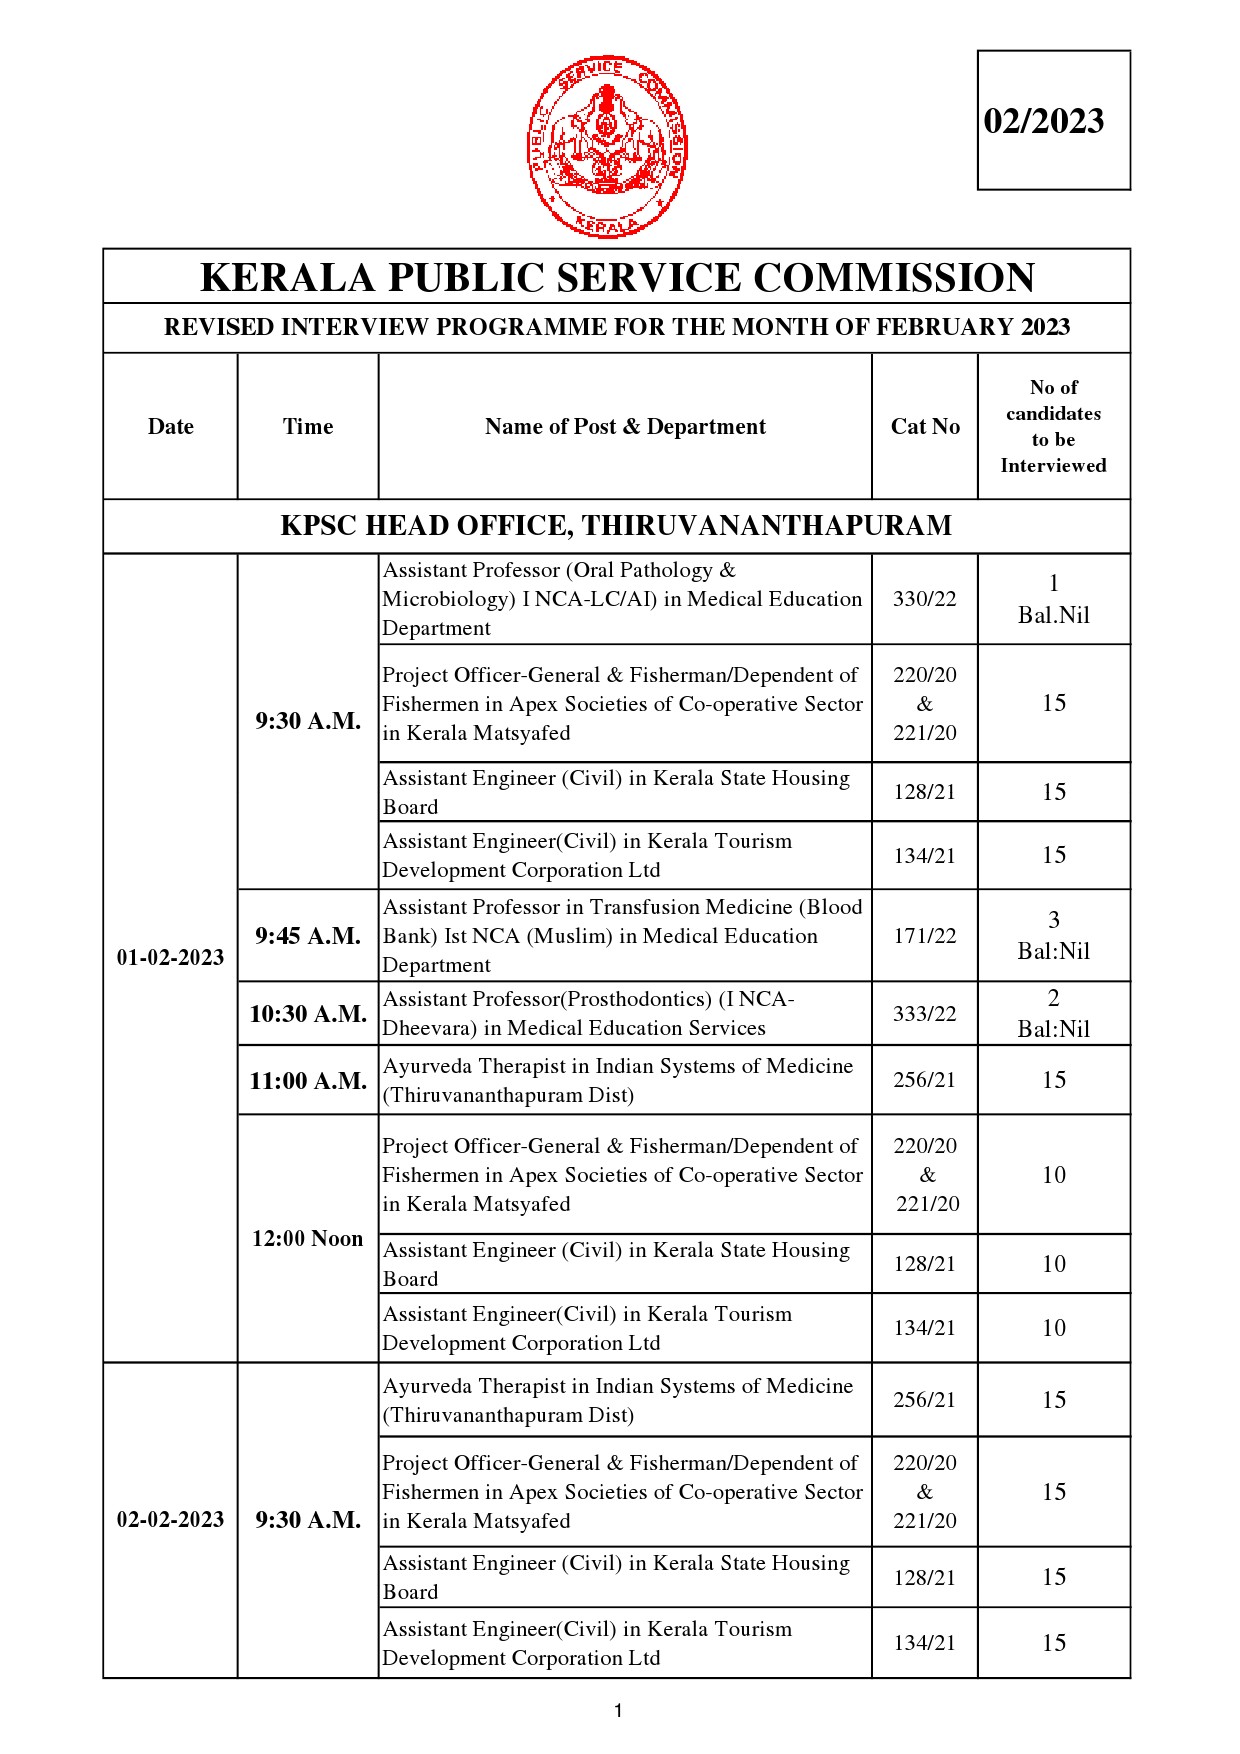 KPSC Revised Interview Programme For February 2023 - Notification Image 1